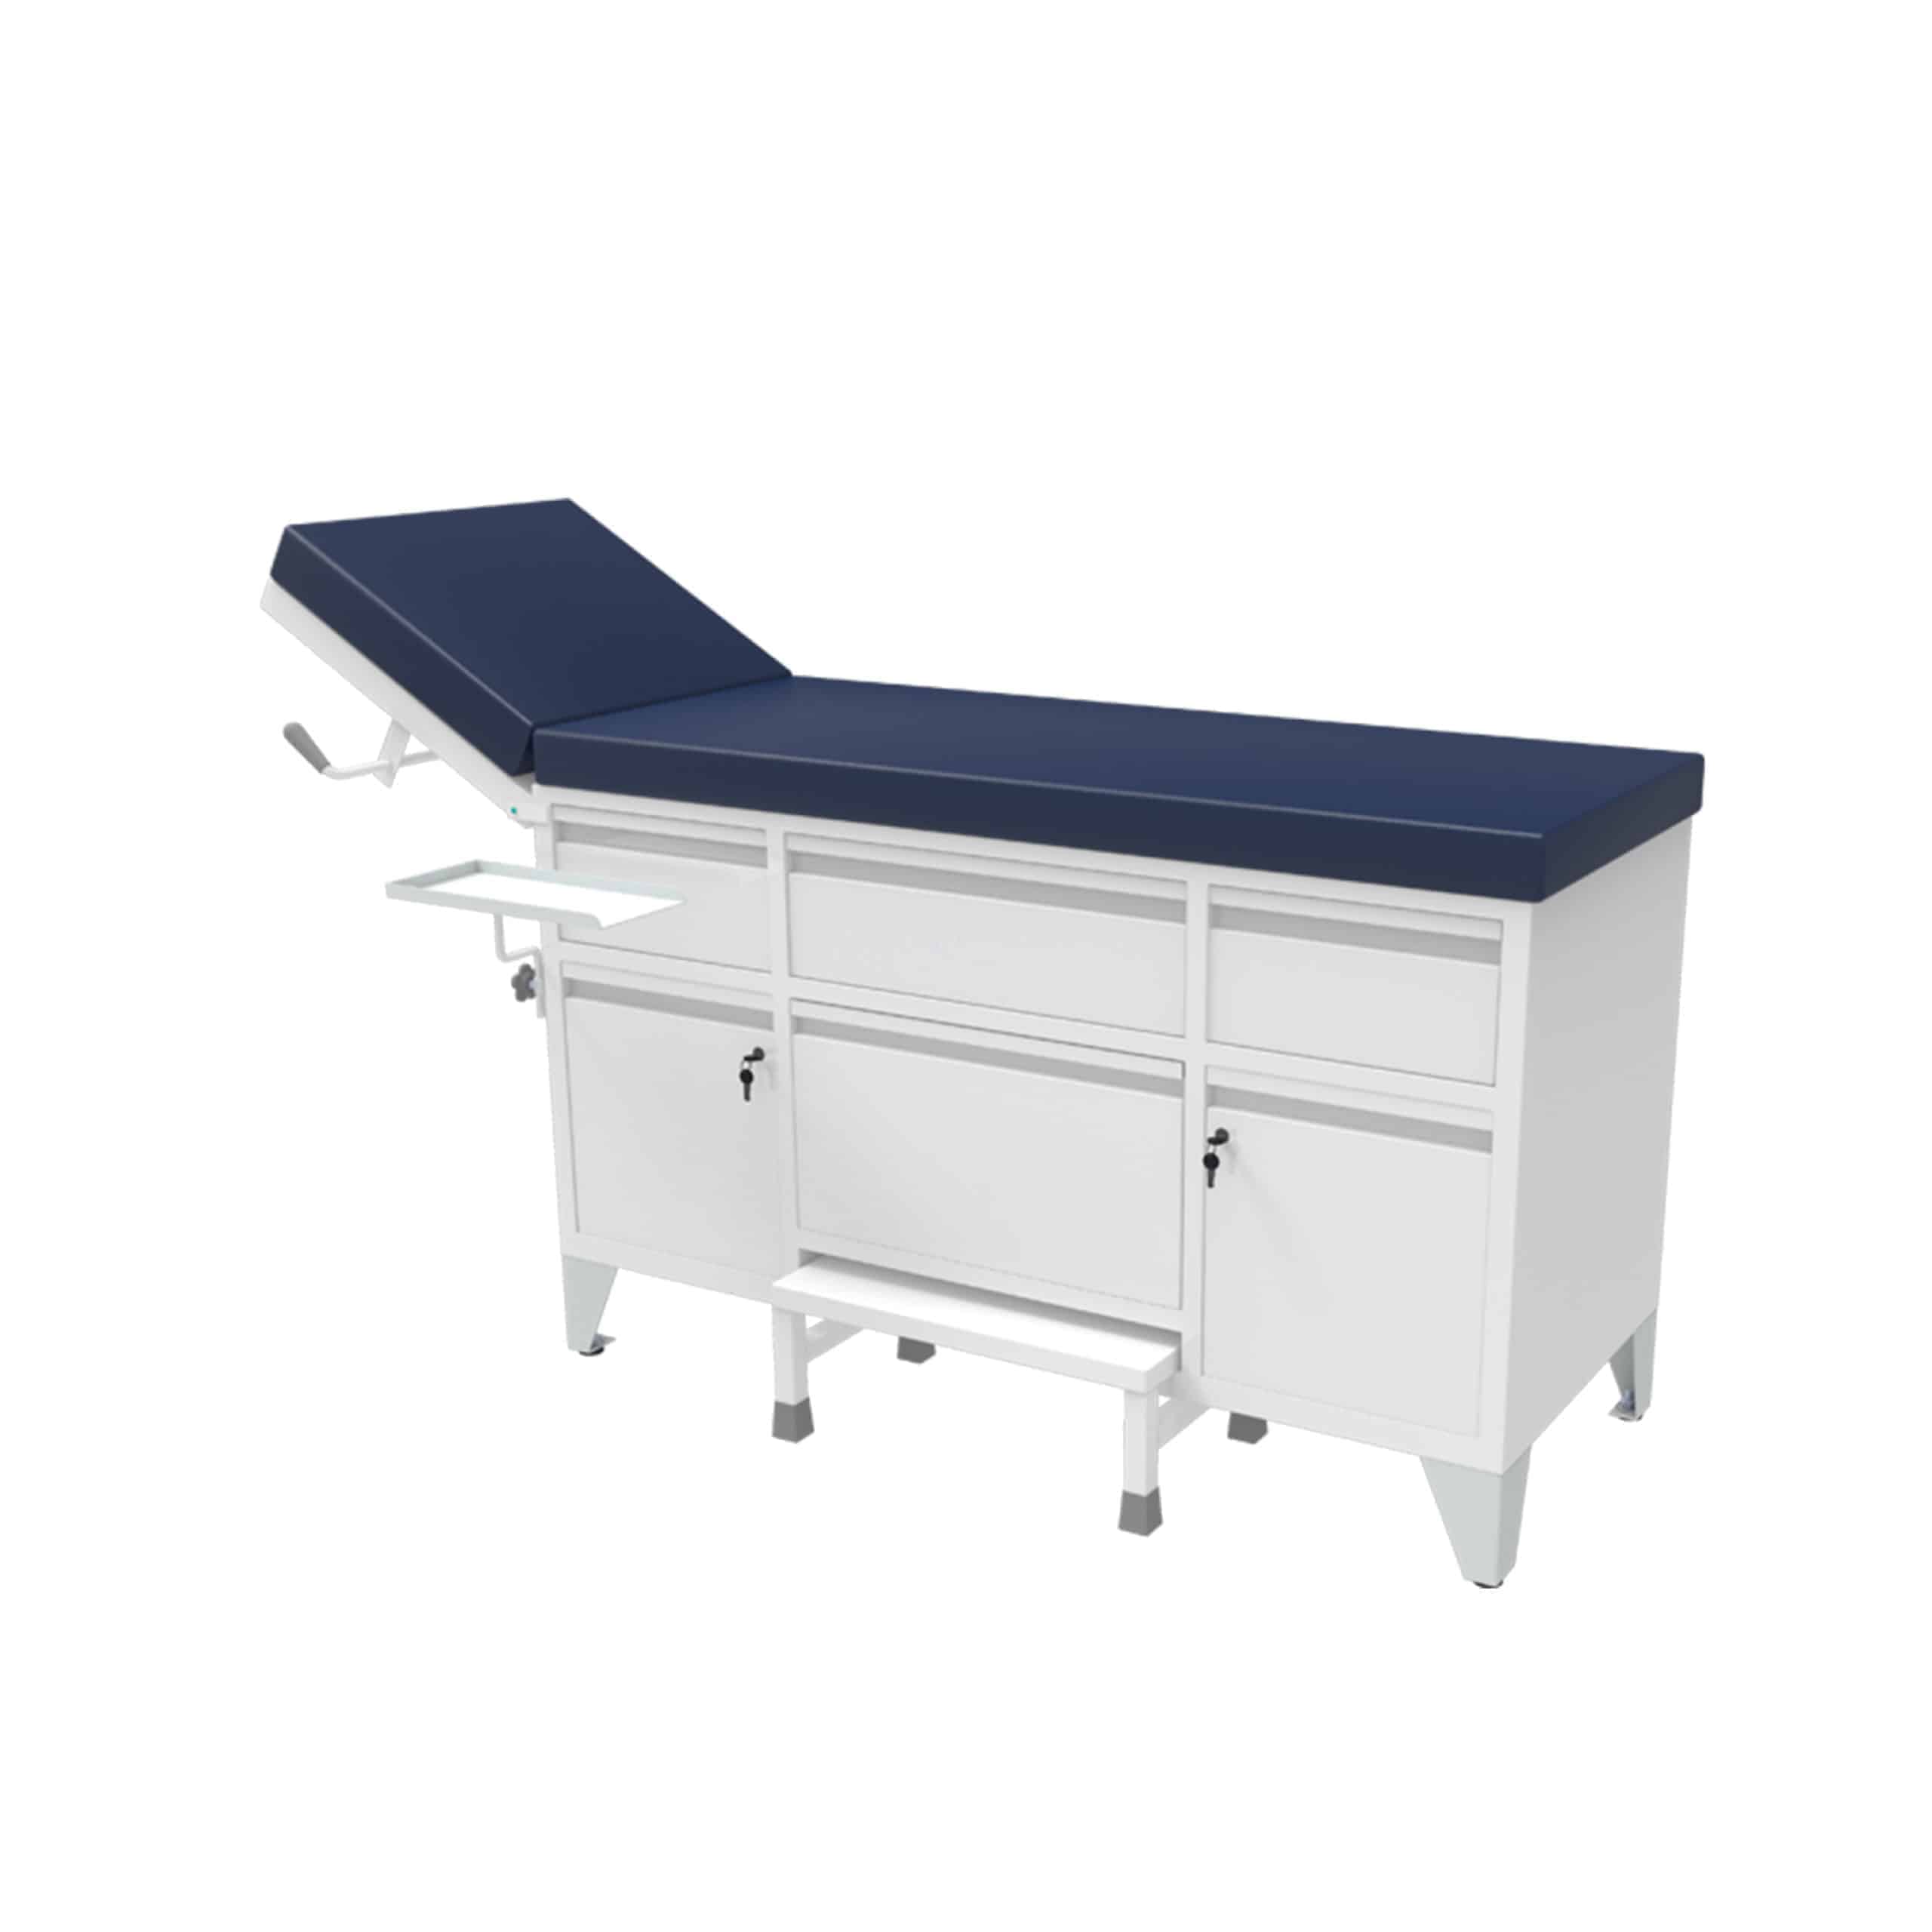 Mobile patient examination couch with wheels